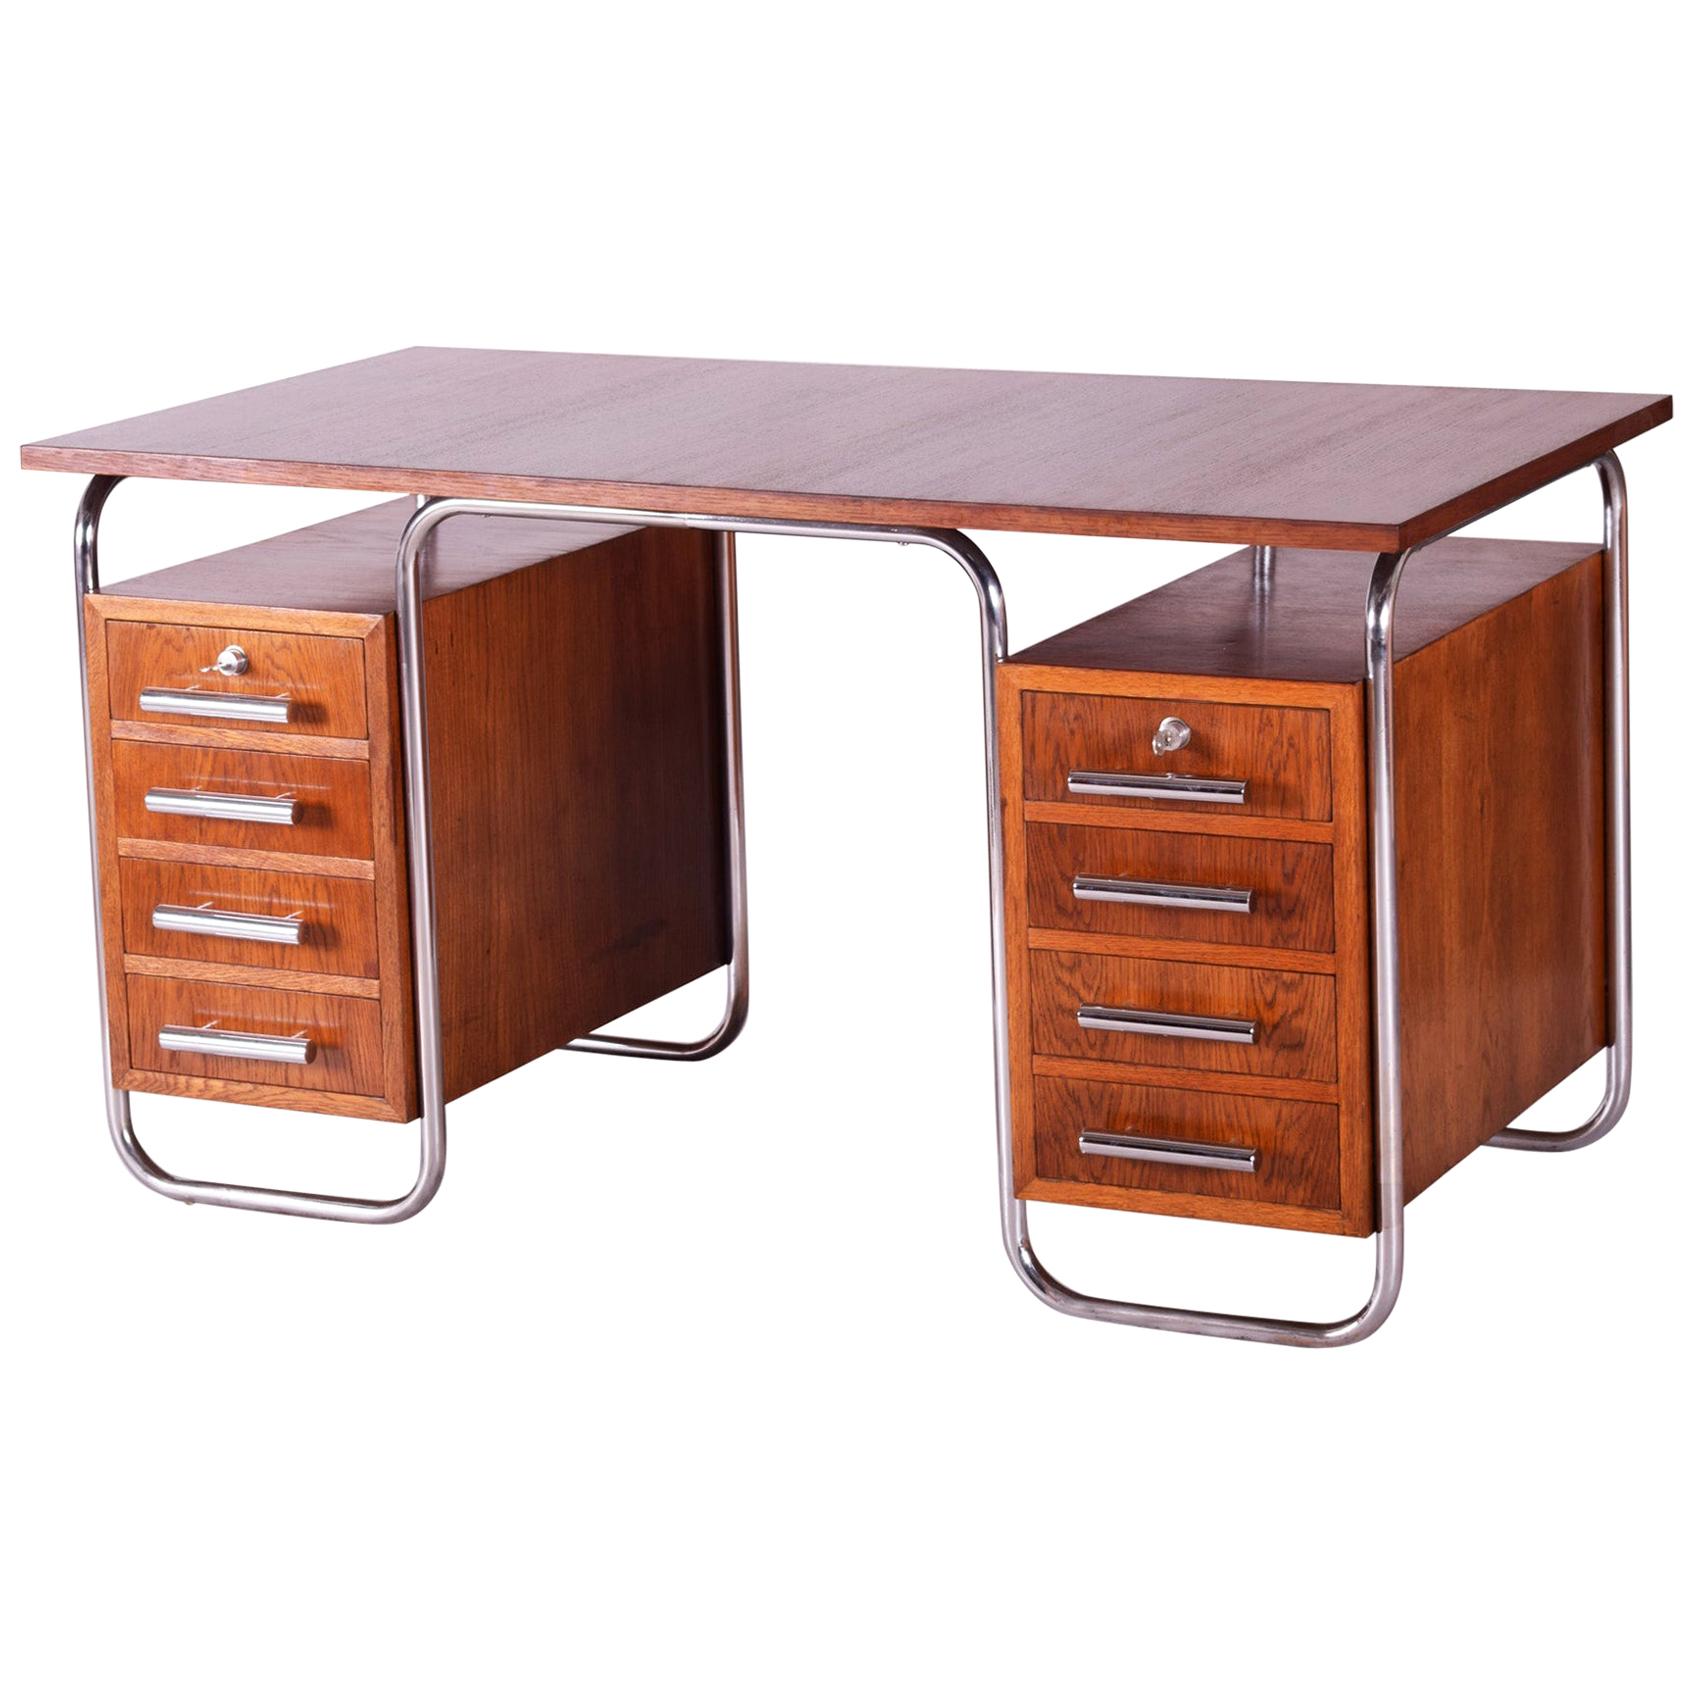 Oak Bauhaus Chrome Writing Desk by Thonet, Good Condition and Patina, 1930s